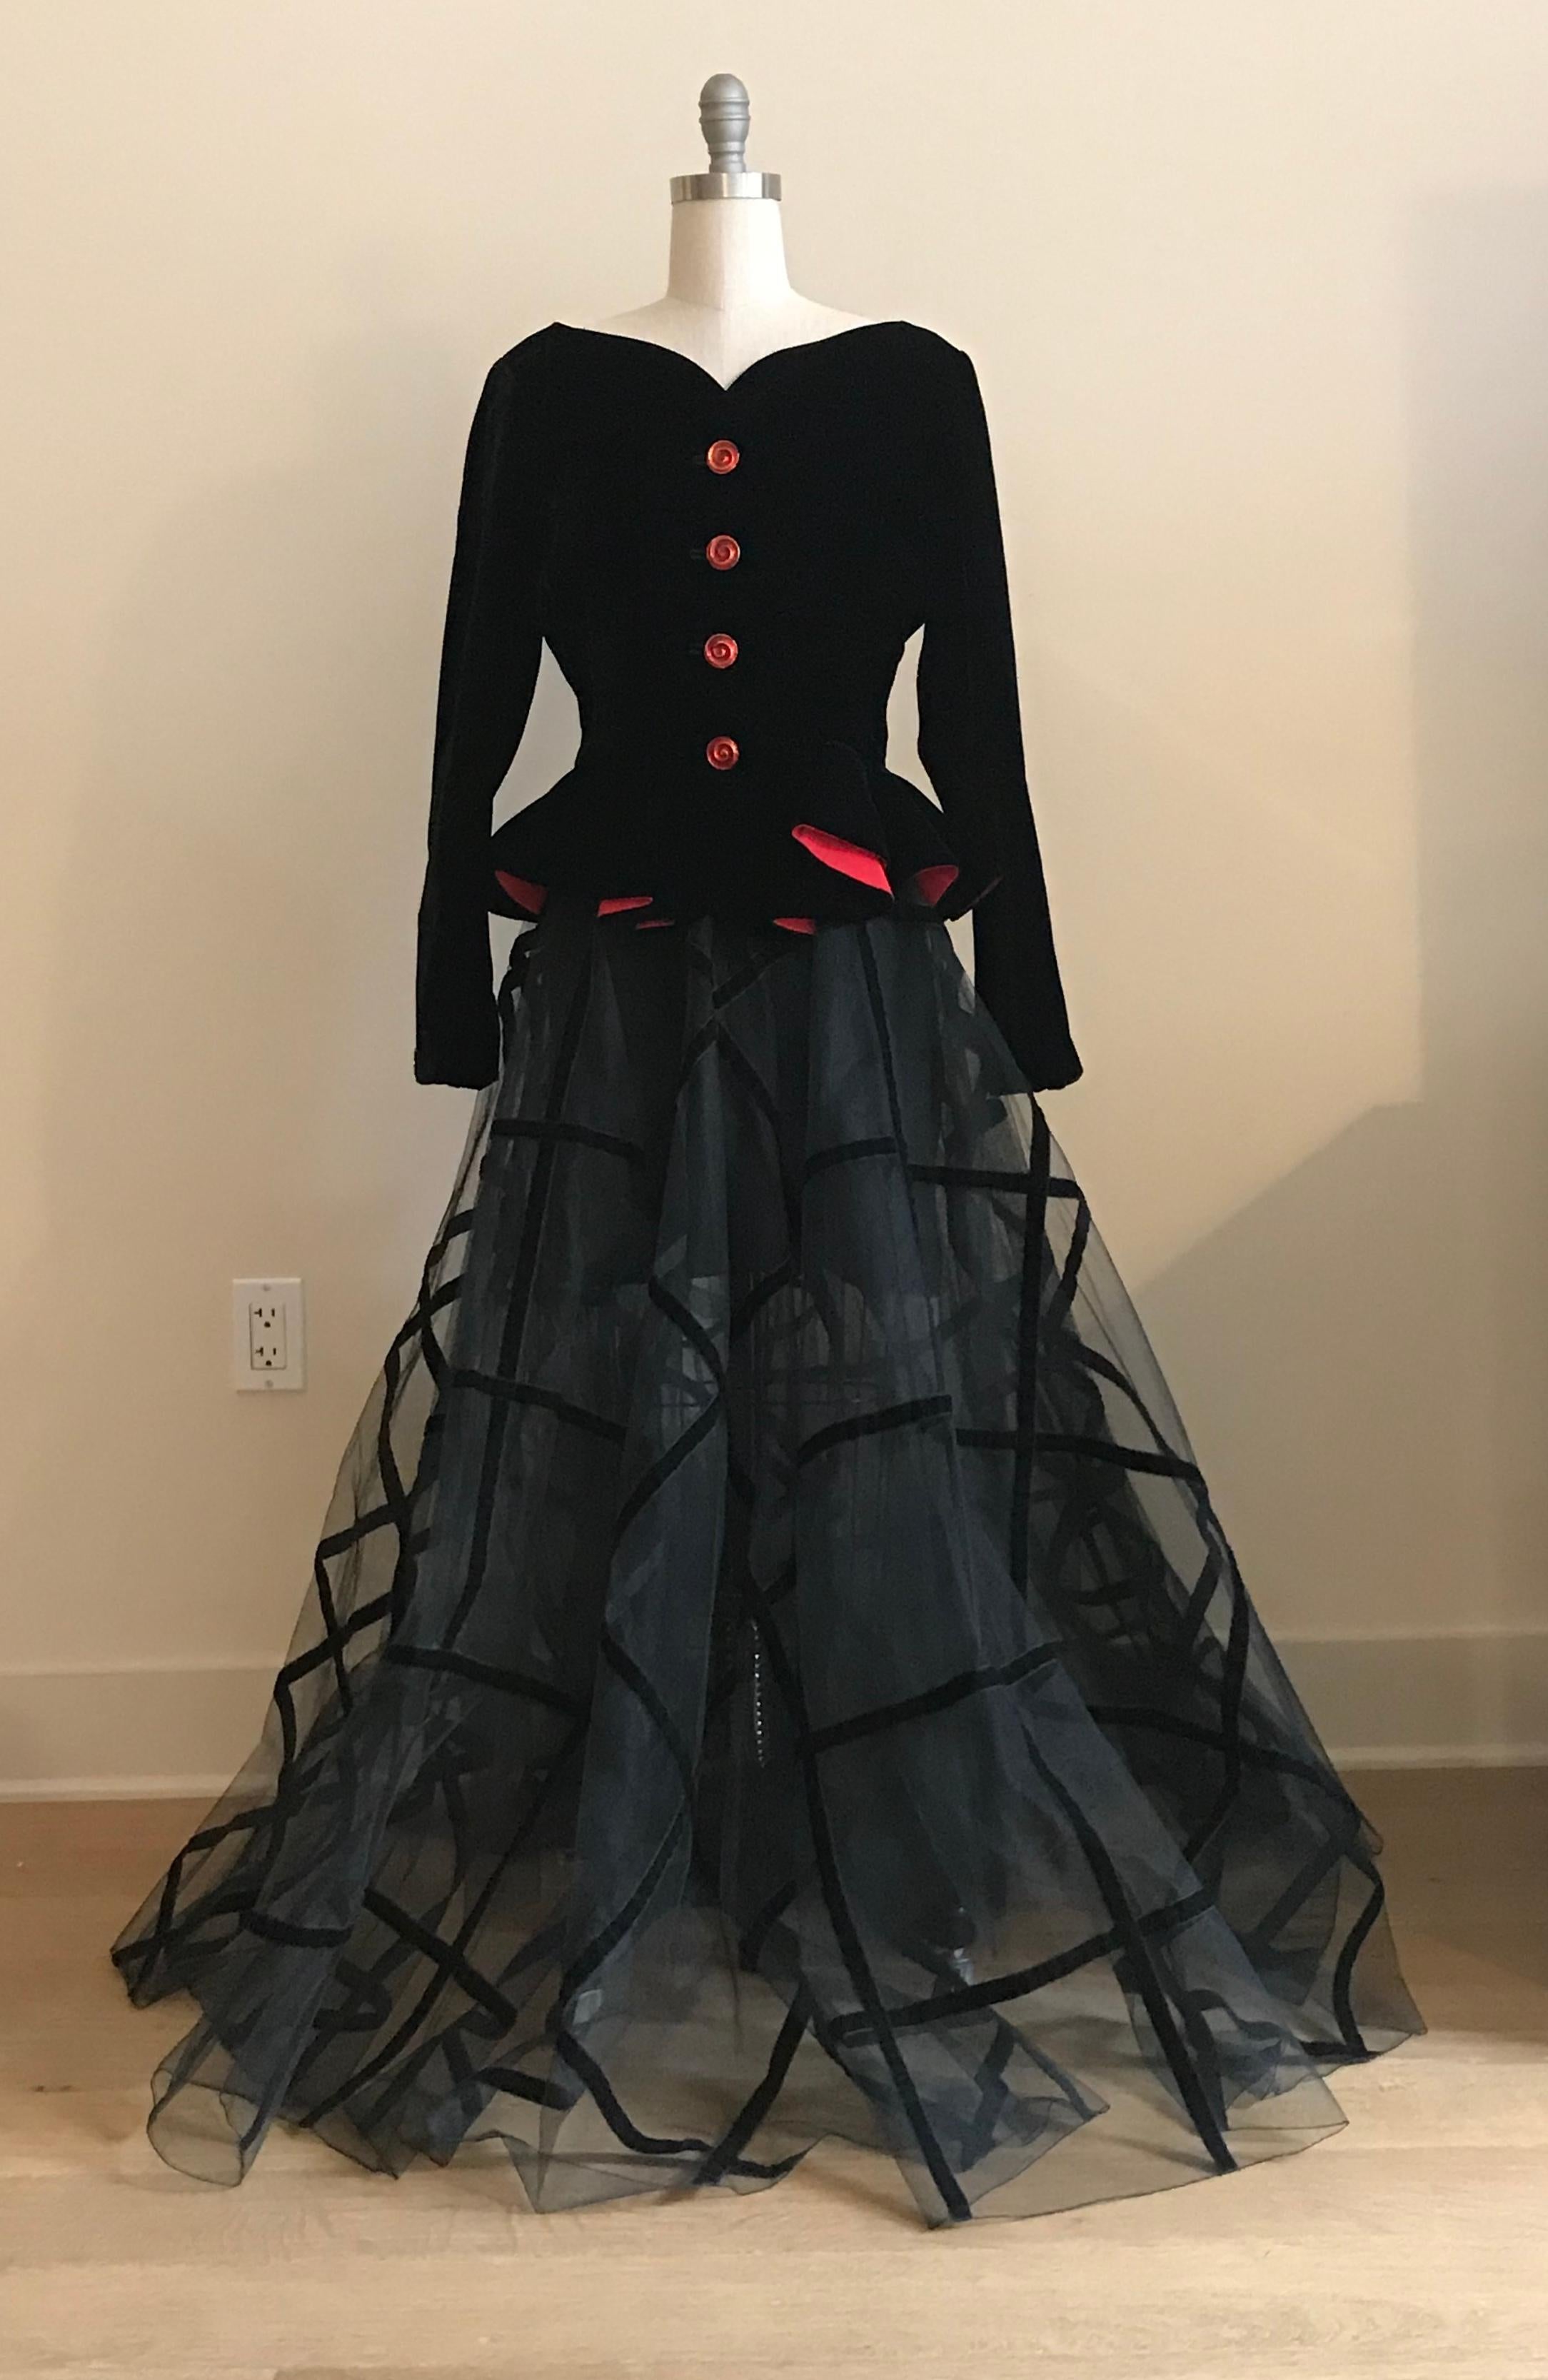 Yves Saint Laurent Rive Gauche 1990s skirt suit featuring a black double layered tulle ball gown style skirt with black velvet trim and a black velvet jacket with red lining and gold and red novelty buttons. Skirt is semi sheer with an attached